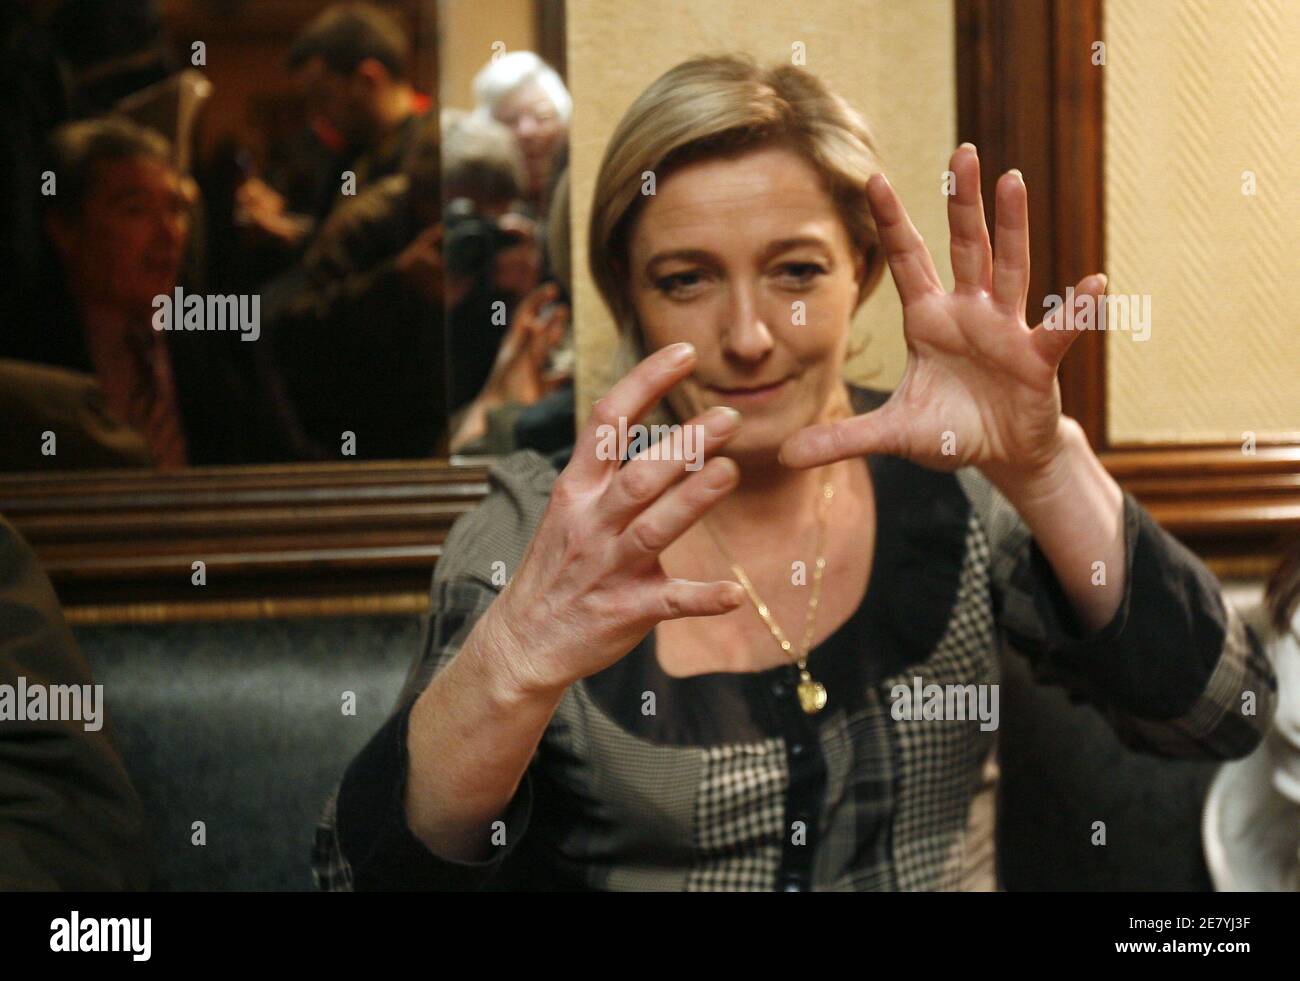 Marine Le Pen, daughter of Front National leader and presidential hopeful Jean-Marie Le Pen makes a break in a cafe as she campaigns on a market in Aulnay-sous-Bois, France on April 5, 2007. Photo by Bernard Bisson/ABACAPRESS.COM Stock Photo